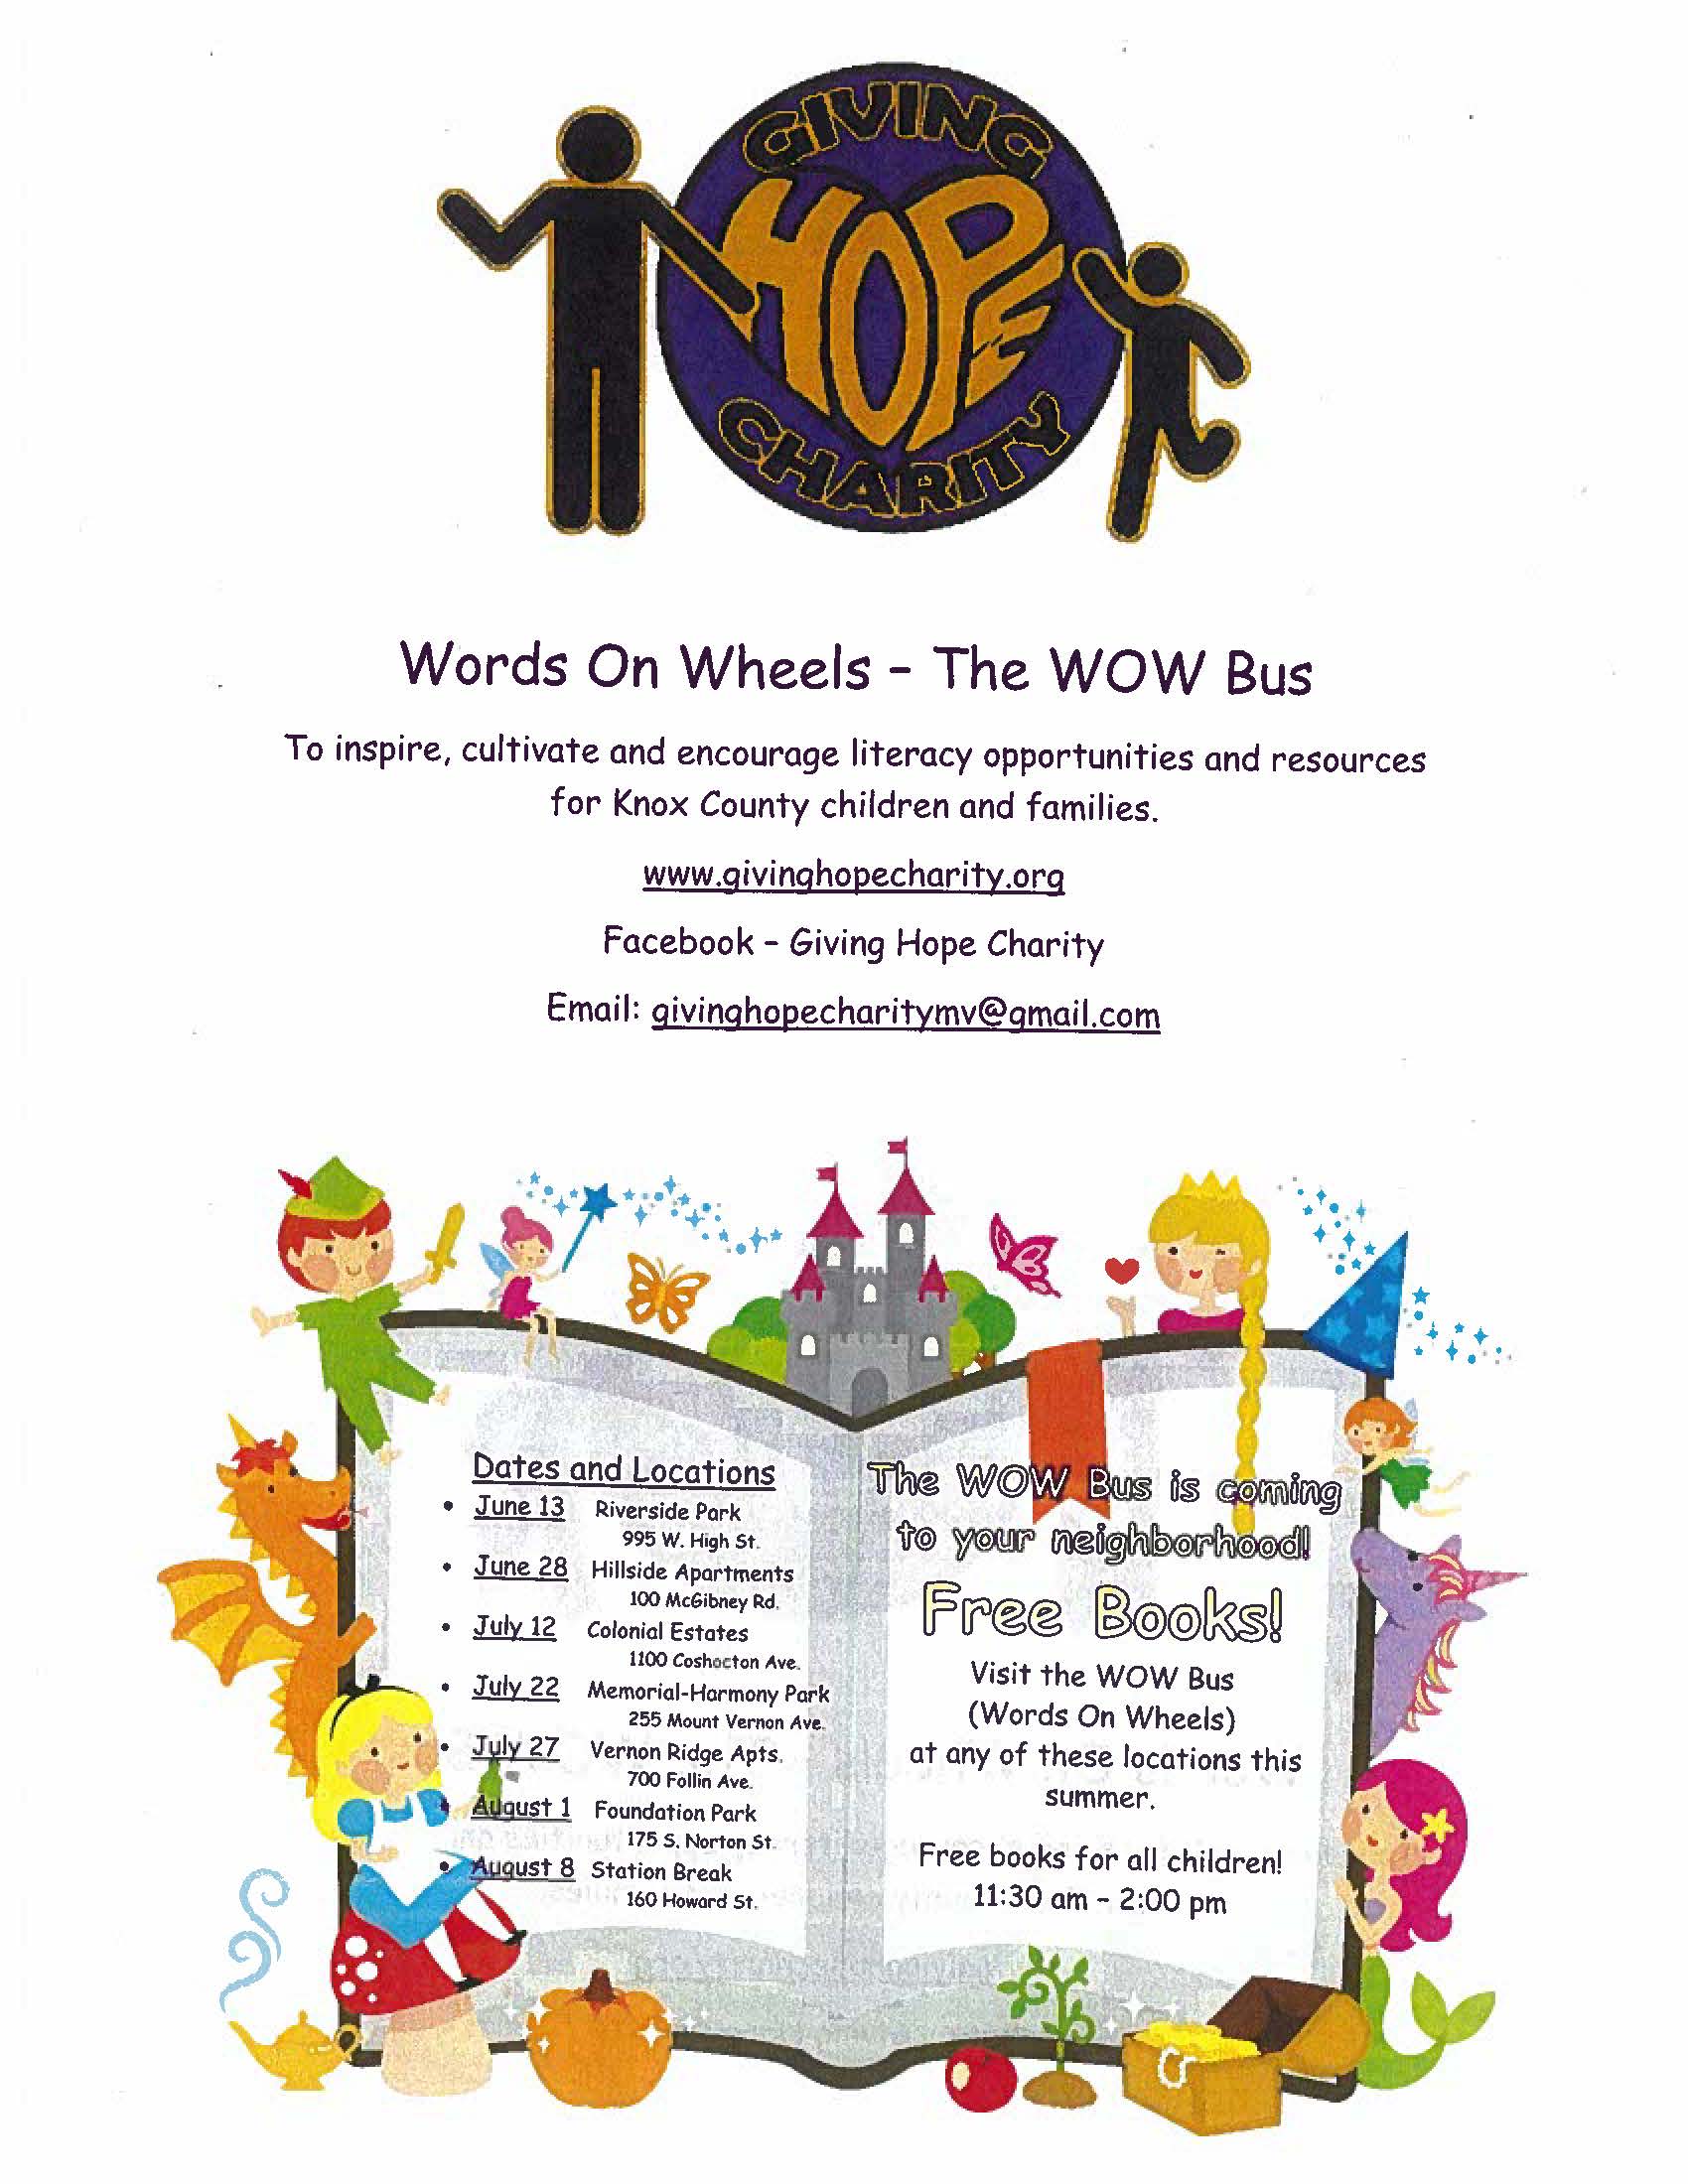 Words on Wheels - The WOW Bus